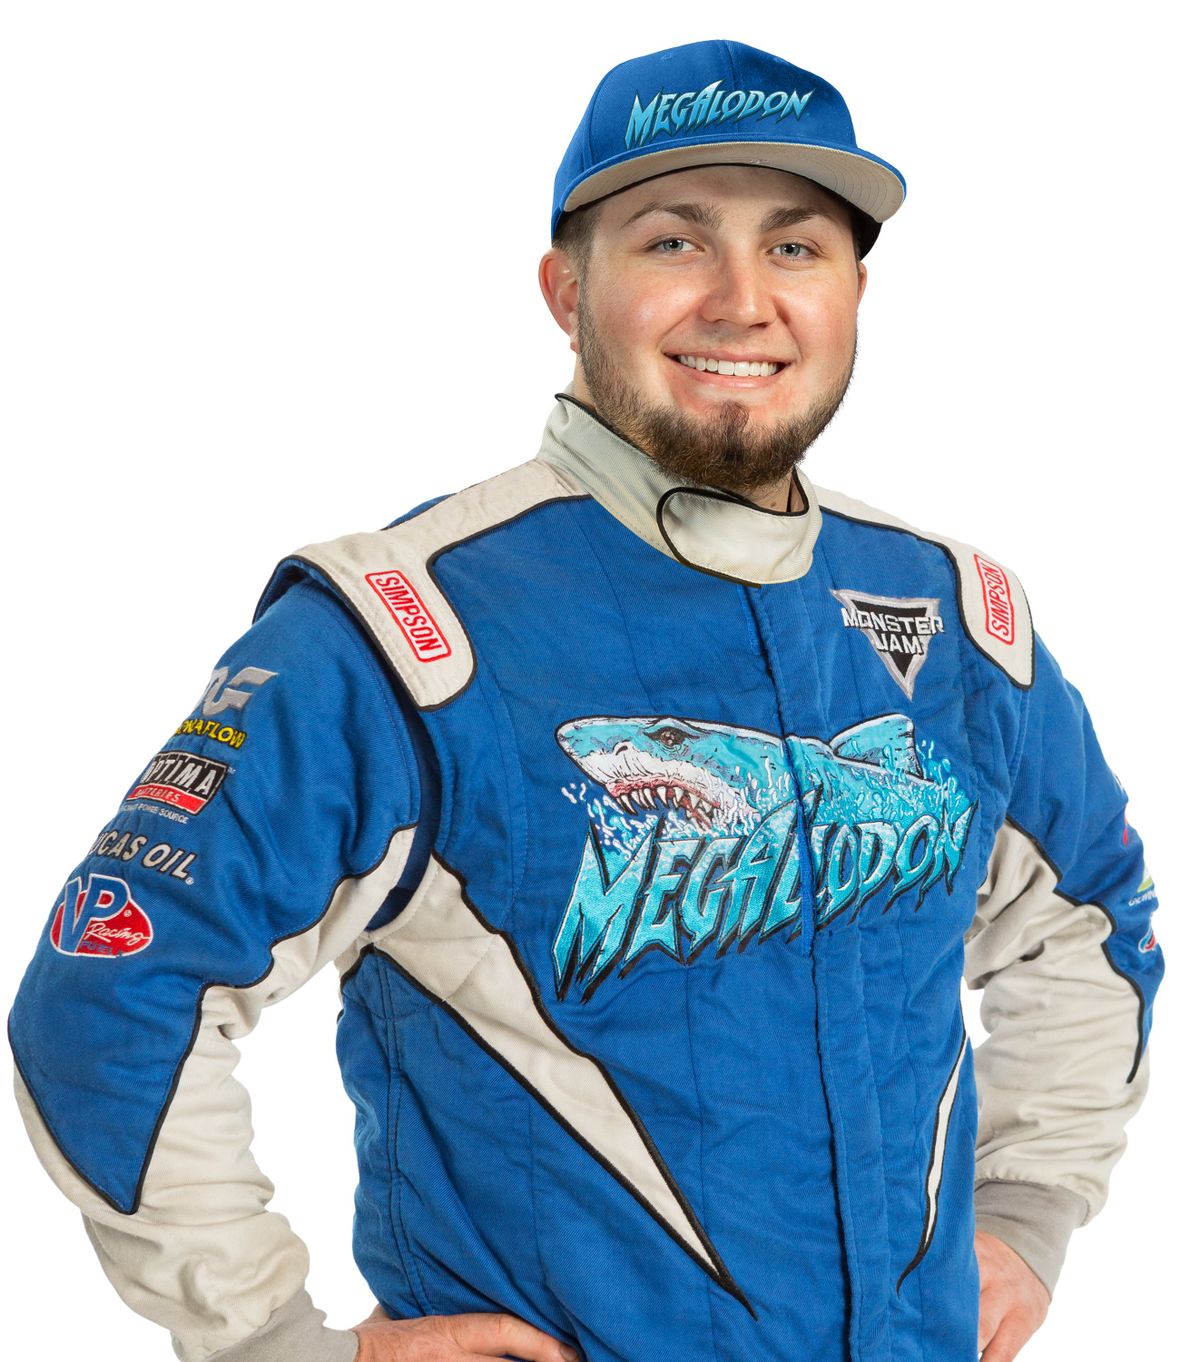 Tristan England, 25, of Texas will be driving Megalodon at Monster Jam at Spokane Arena this weekend.  (Feld Entertainment)